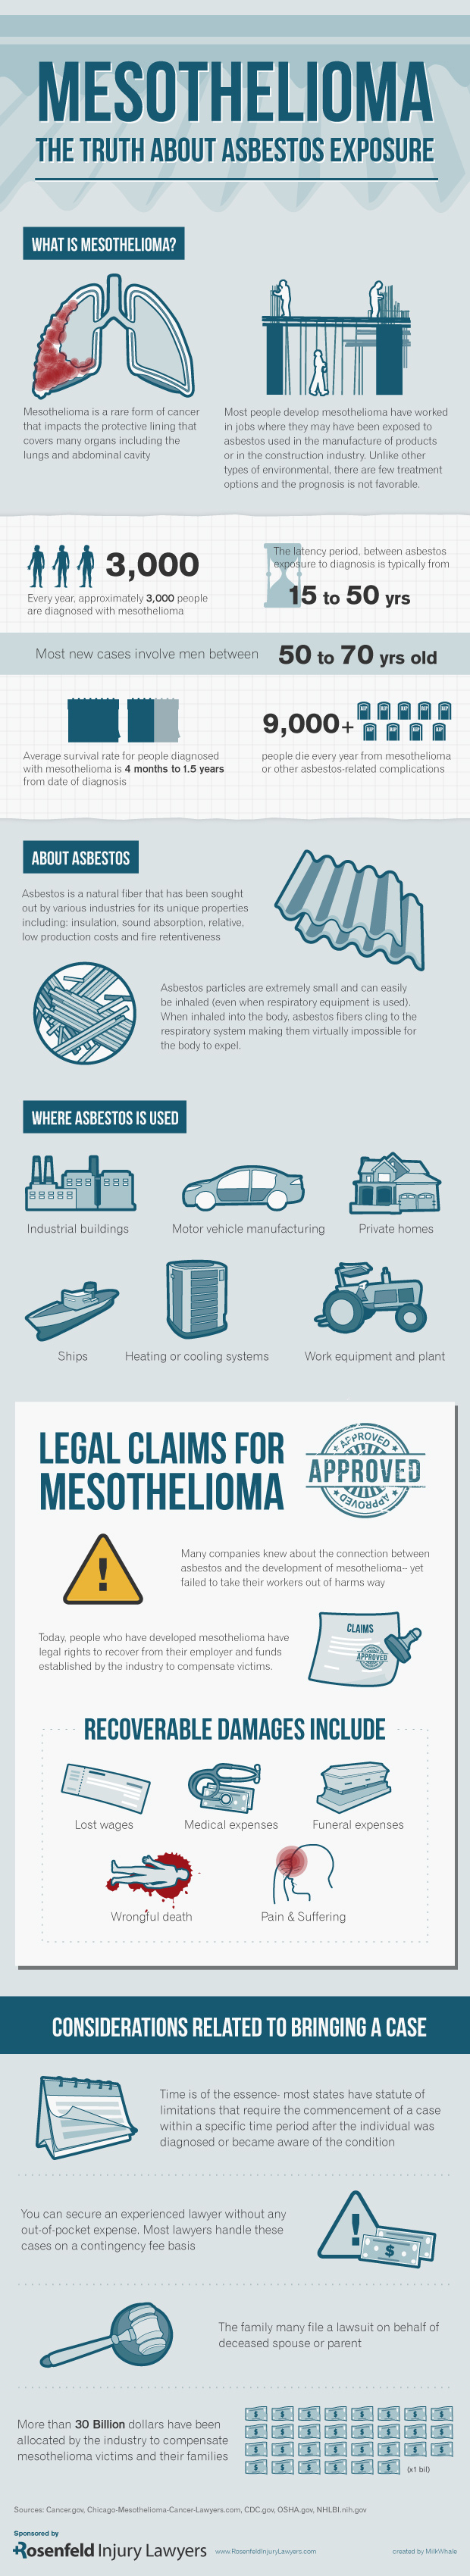 Mesothelioma: The Truth About Asbestos Exposure